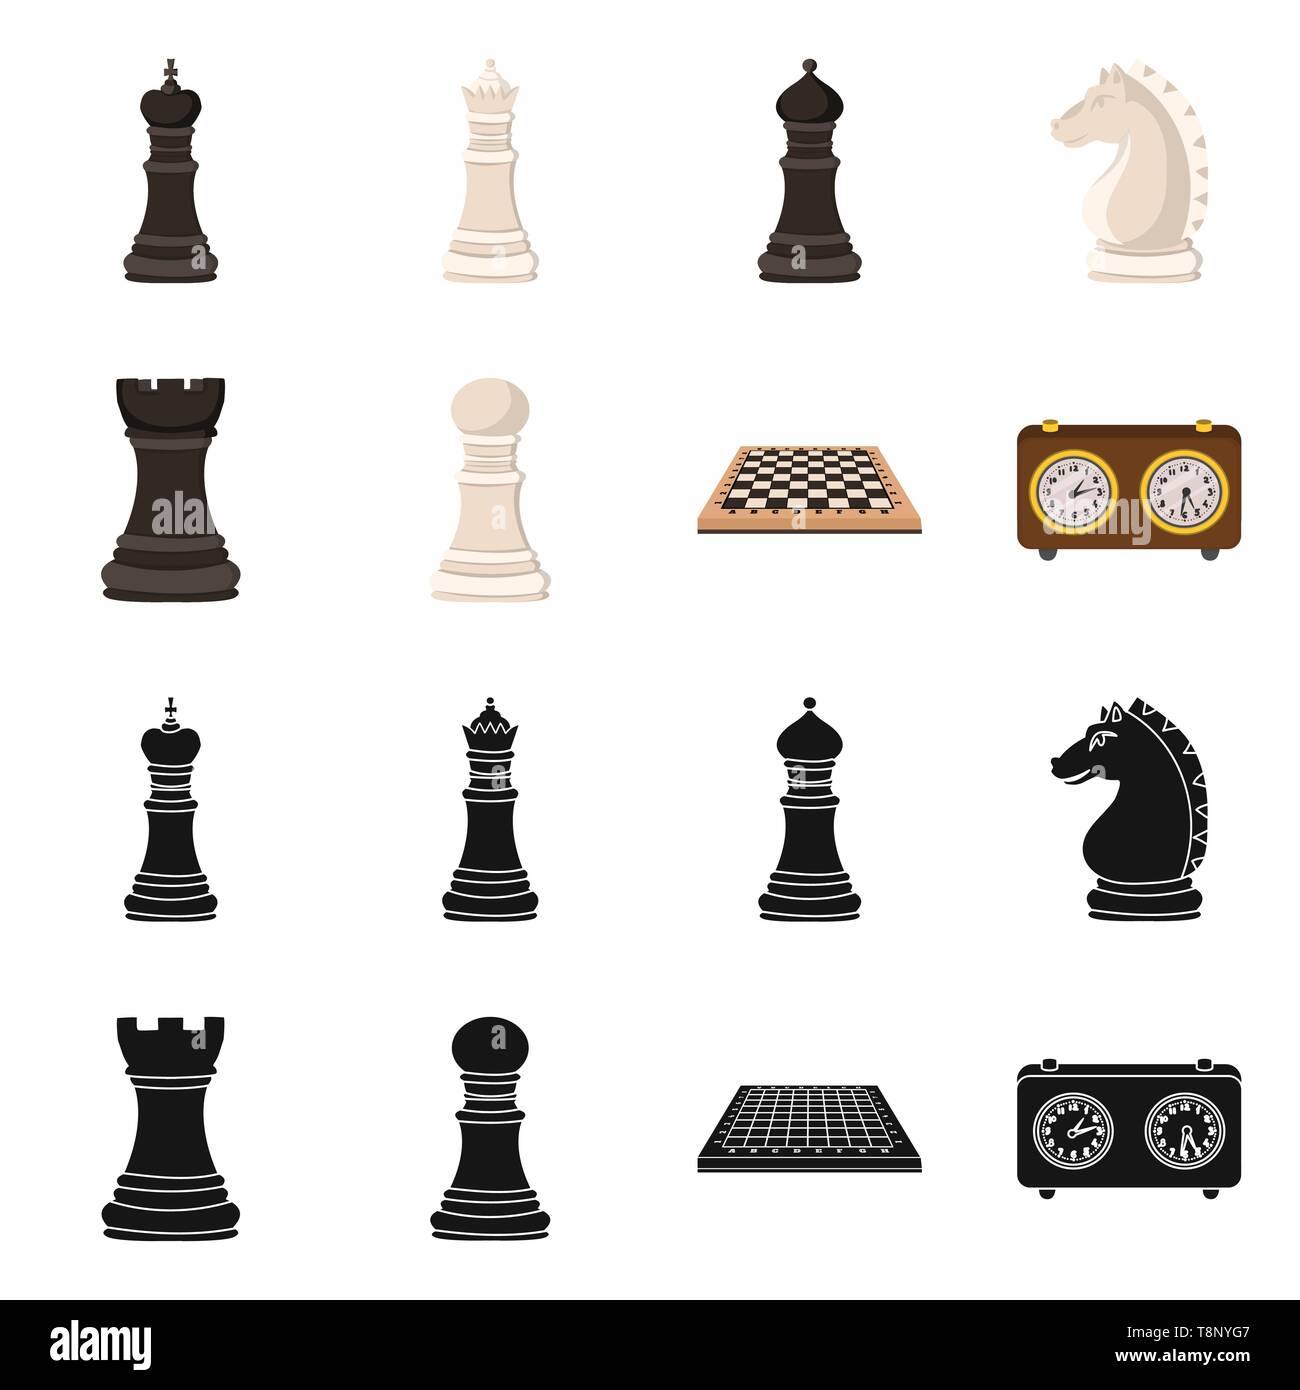 king,queen,bishop,knight,rook,pawn,chessboard,clock,board,strategic,horse,black,timer,white,championship,castle,checkerboard,speed,business,mate,tower,figure,empty,leadership,check,head,network,counter,table,button,checkmate,thin,club,target,chess,game,piece,strategy,tactical,play,set,vector,icon,illustration,isolated,collection,design,element,graphic,sign Vector Vectors , Stock Vector